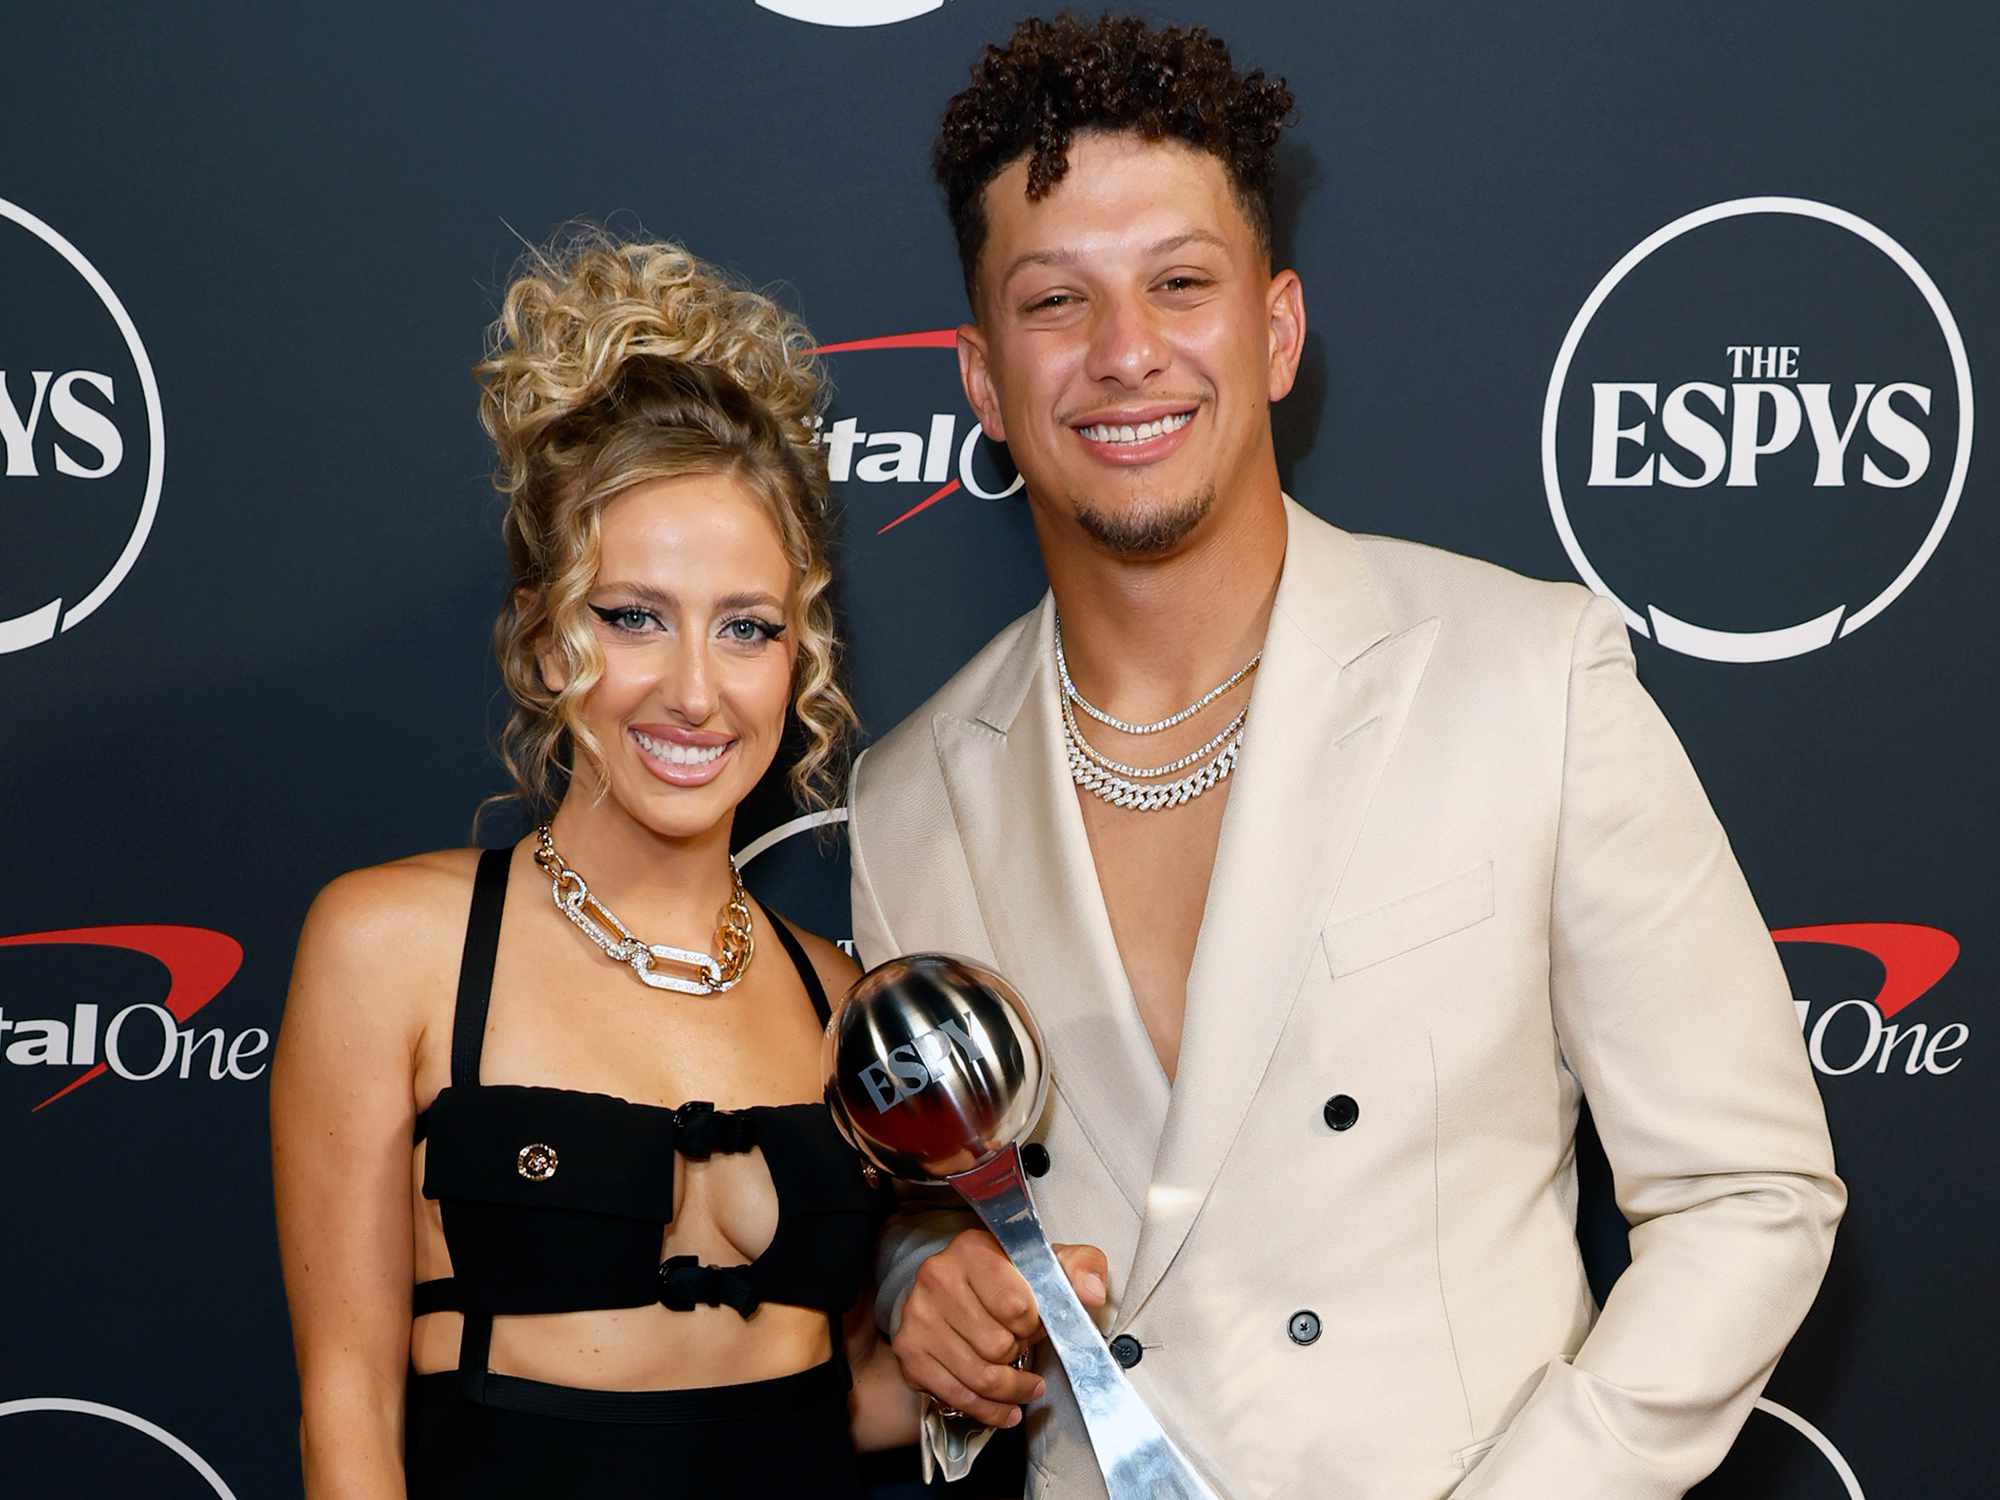 Patrick Mahomes Shows His Love for Wife Brittany’s Sexy “SI Swimsuit” Photoshoot